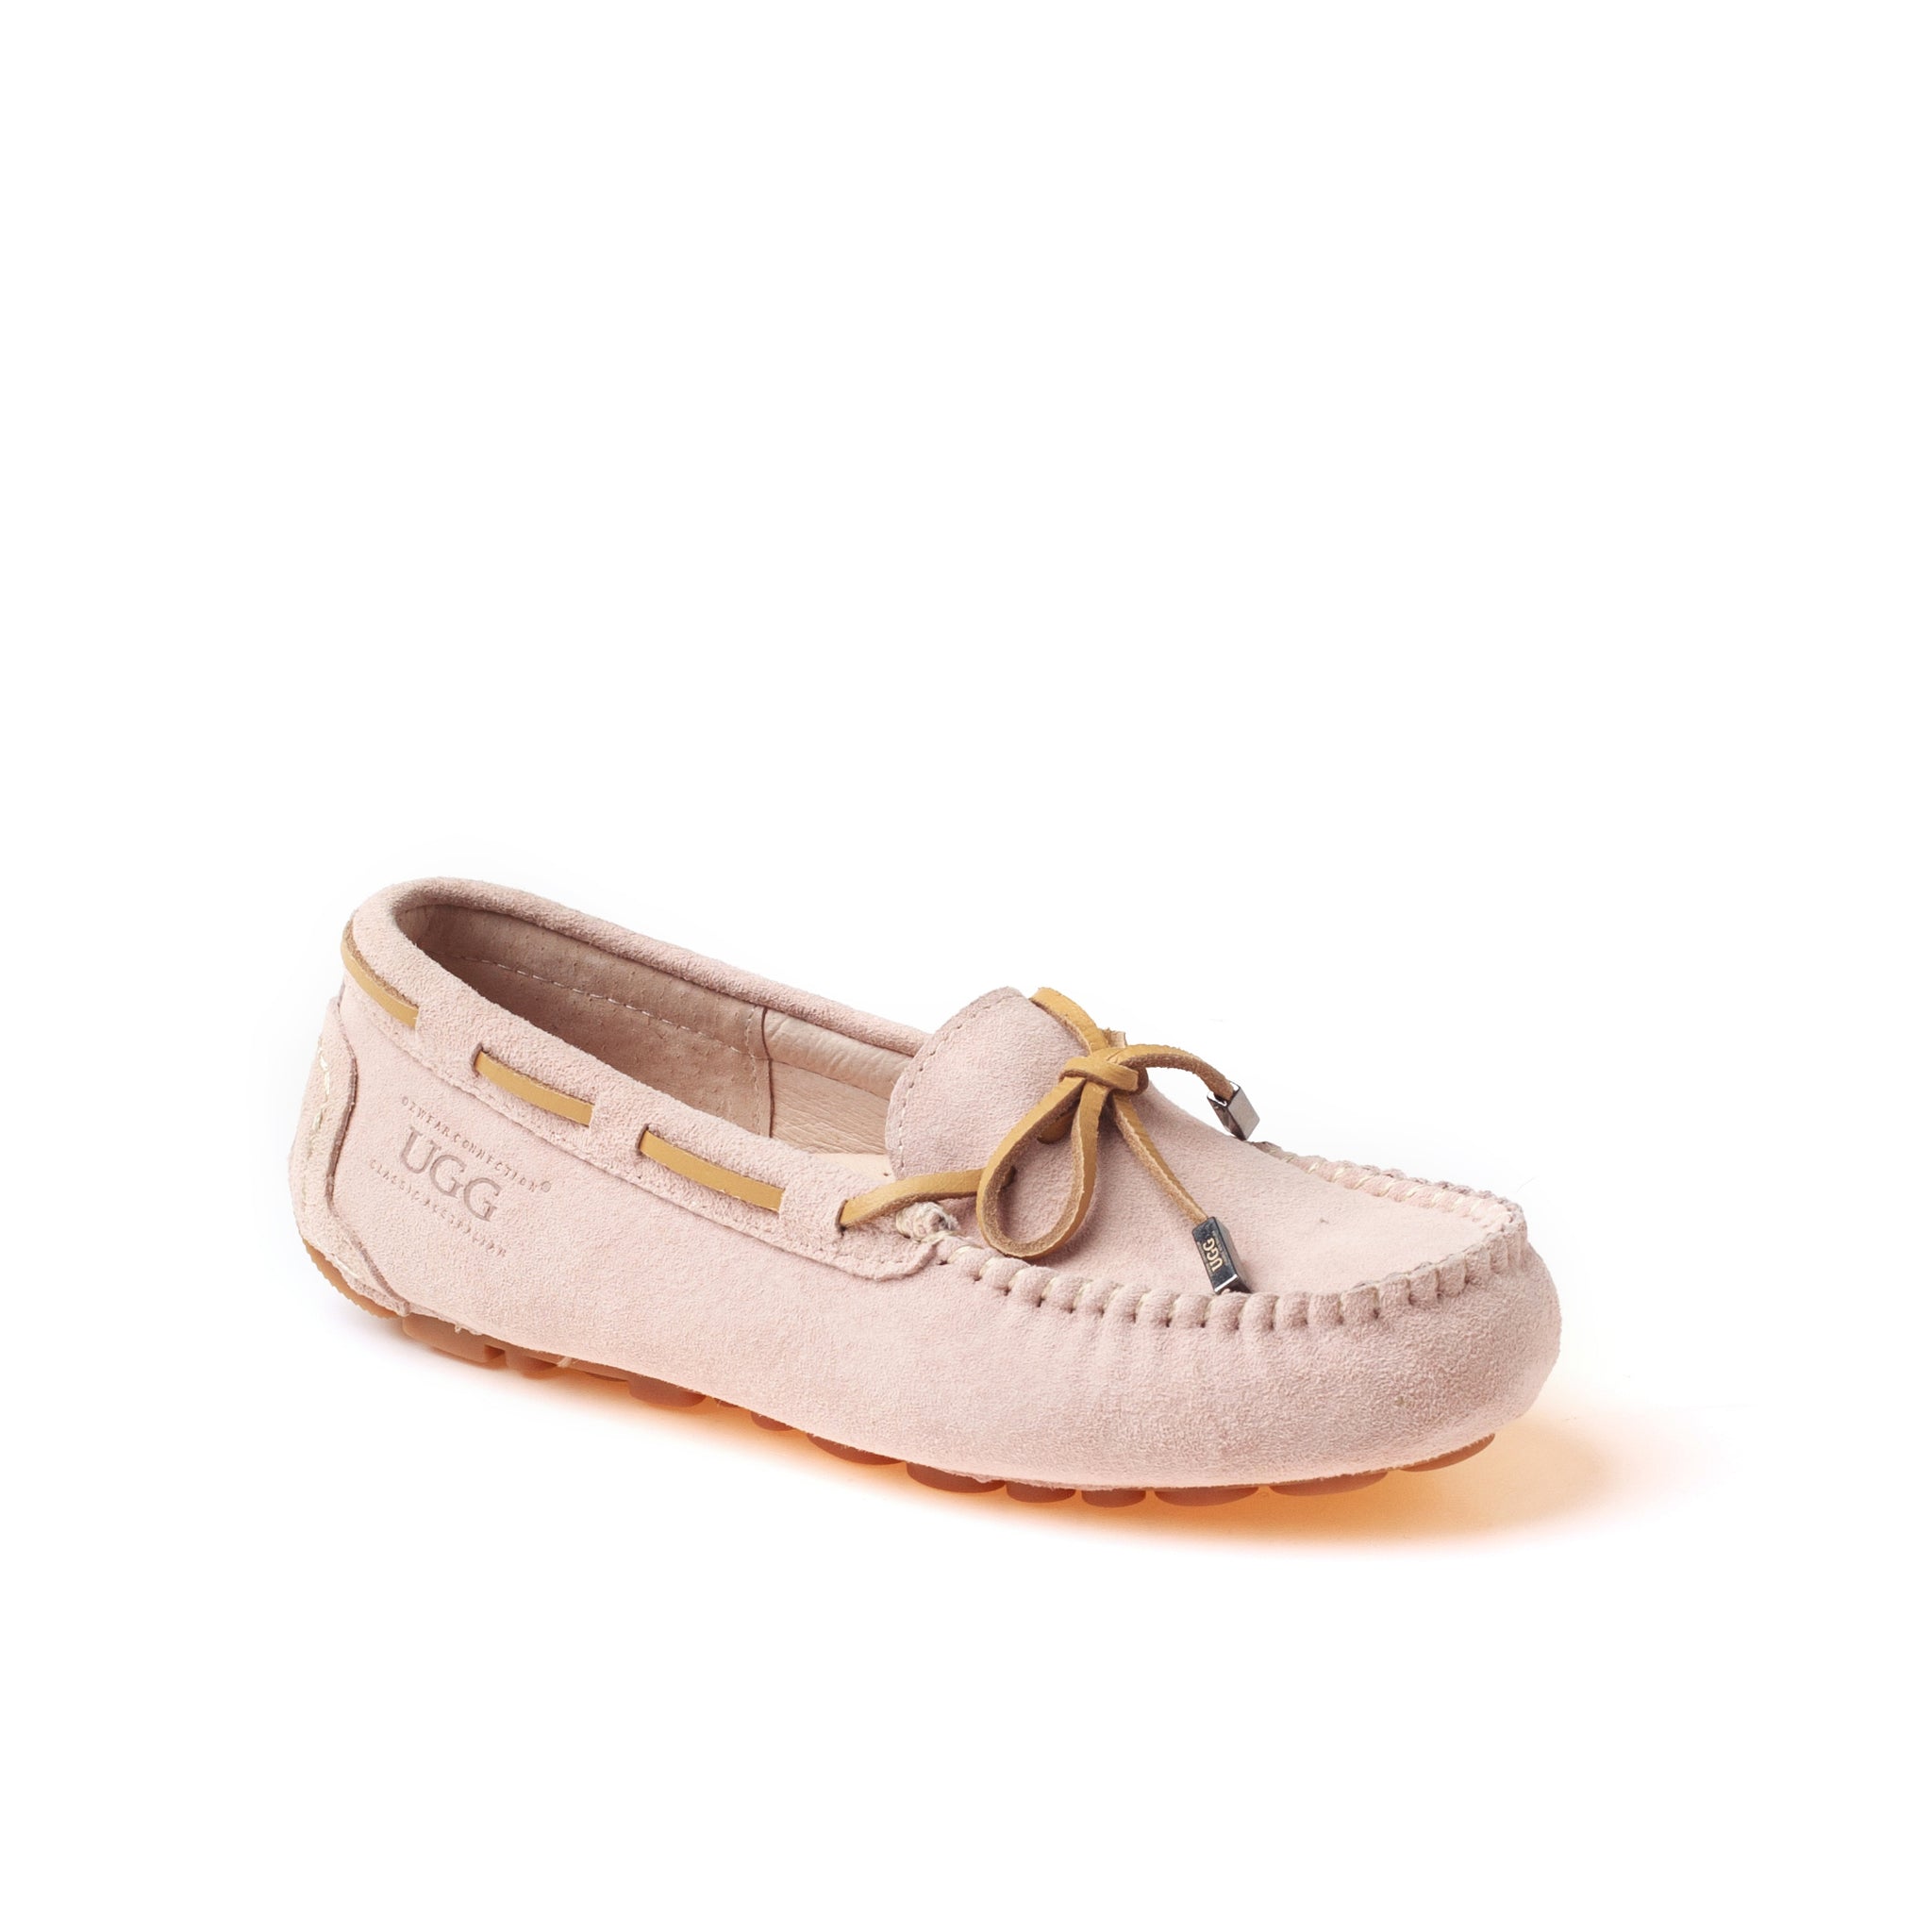 Ugg Aven Lace Moccasin